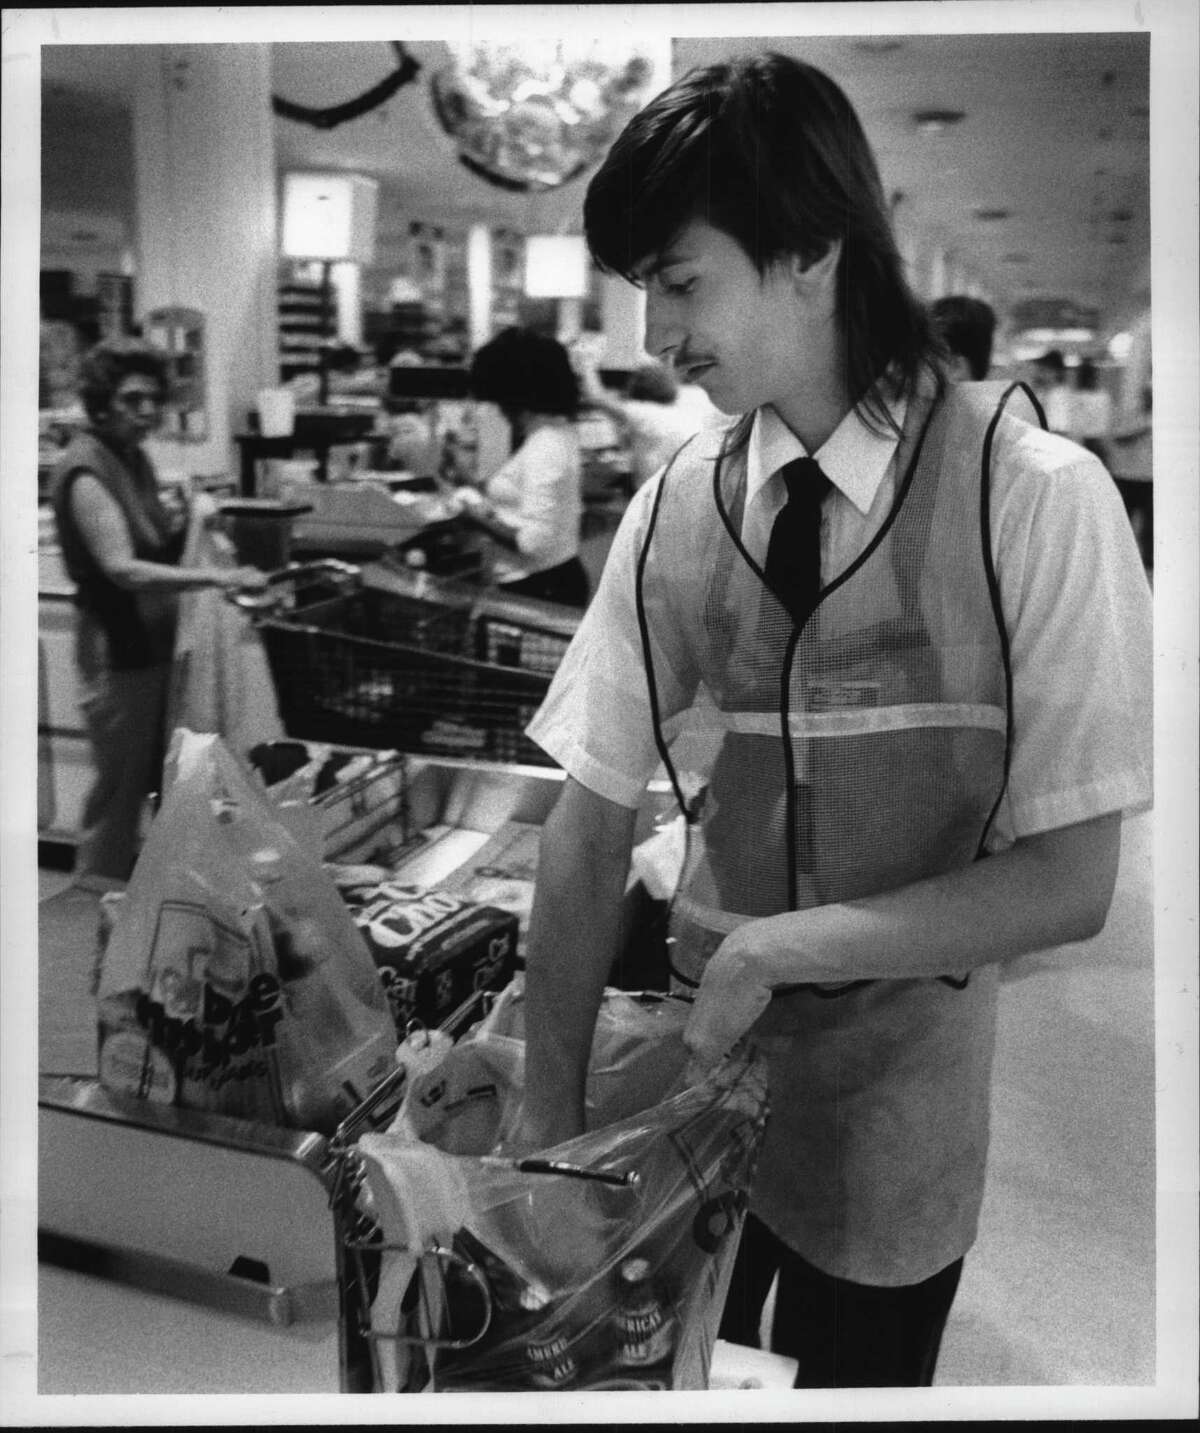 Price Chopper, Eastern Parkway, Schenectady, New York - Paul LeViker, 15, of Schenectady, packs groceries Friday afternoon as part of stay in school program. June 23, 1989 (John Carl D'Annibale/Times Union Archive)